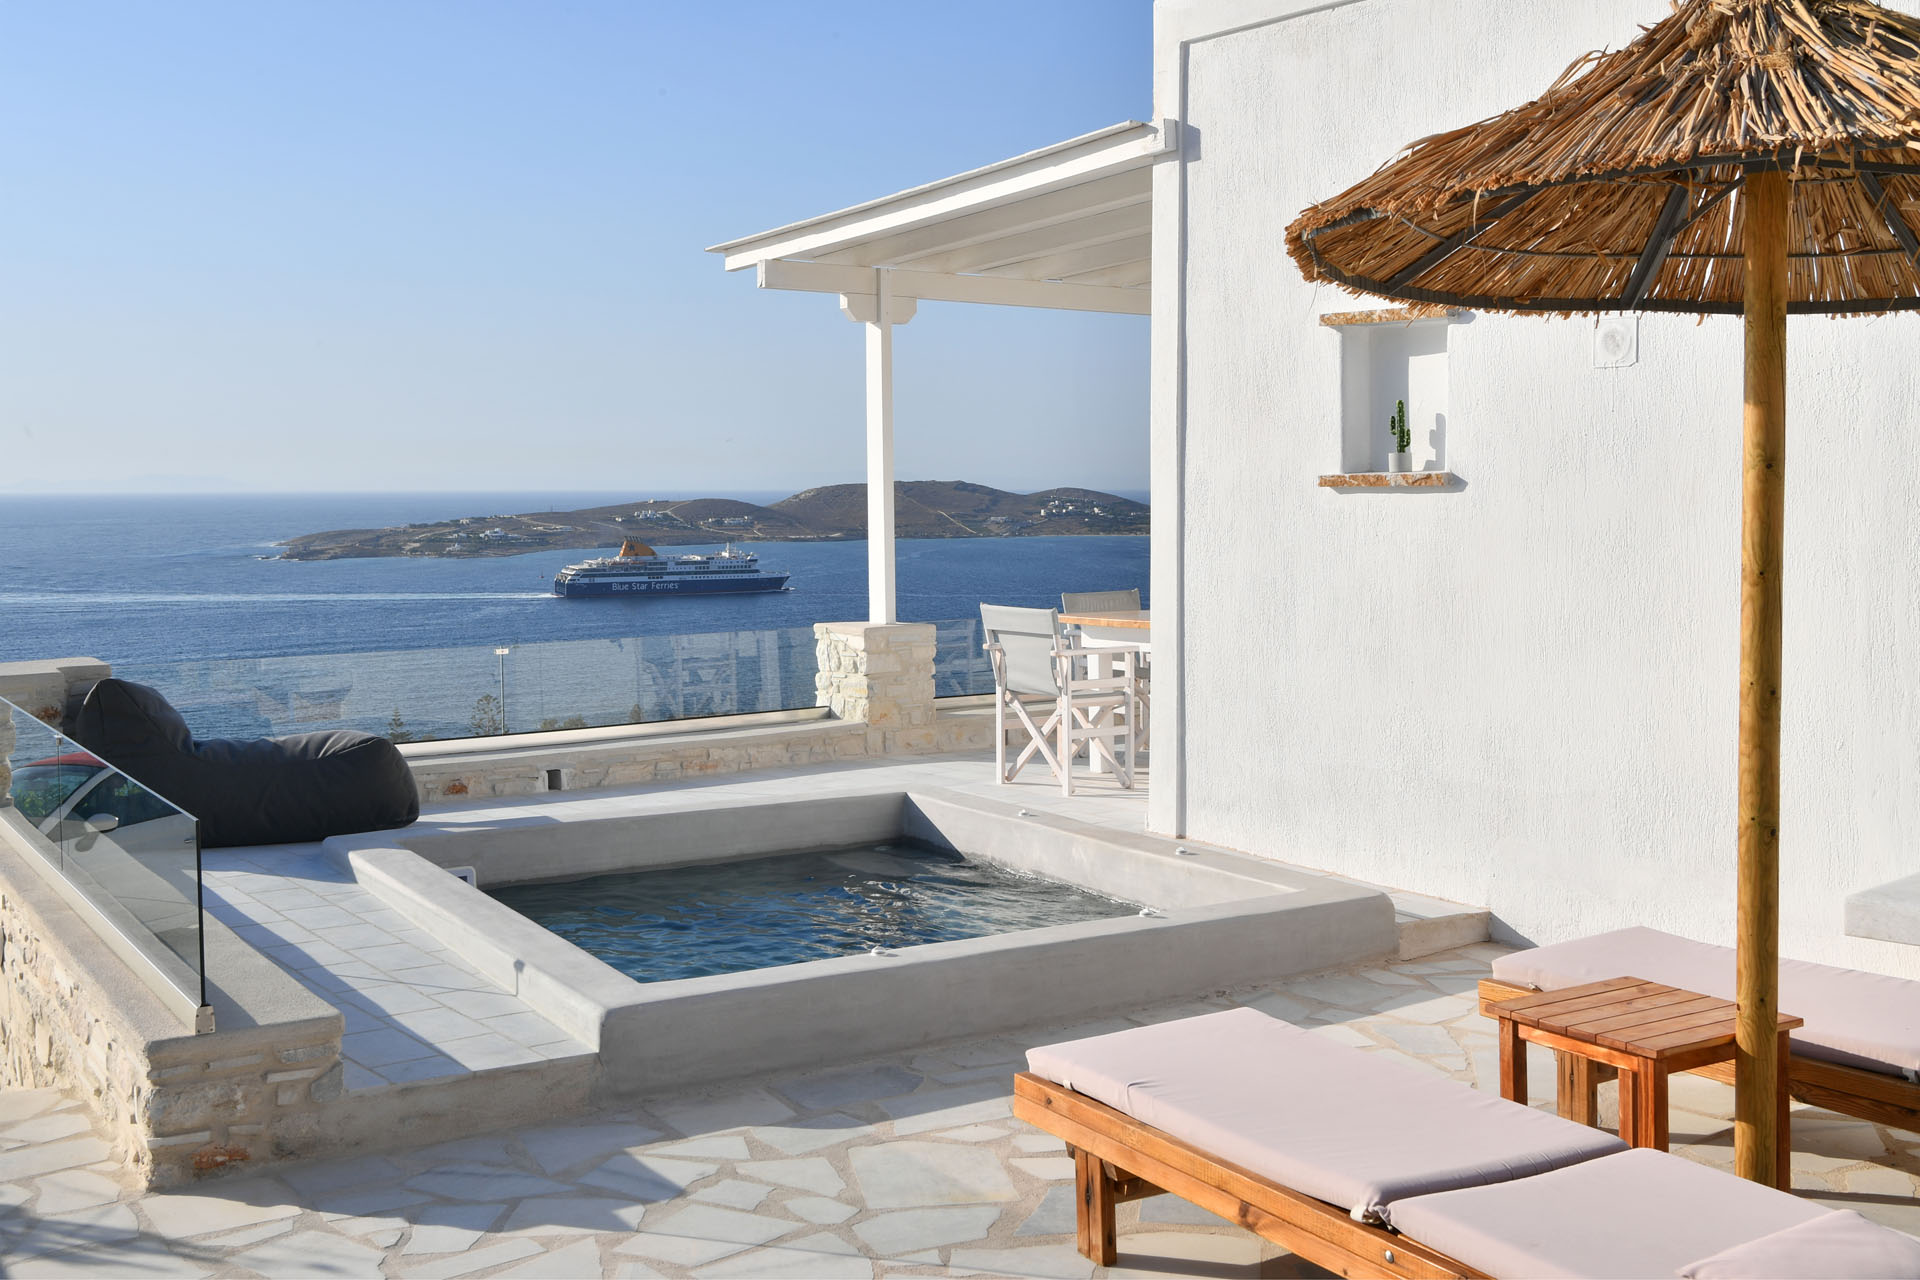 What is the best area to stay in Paros